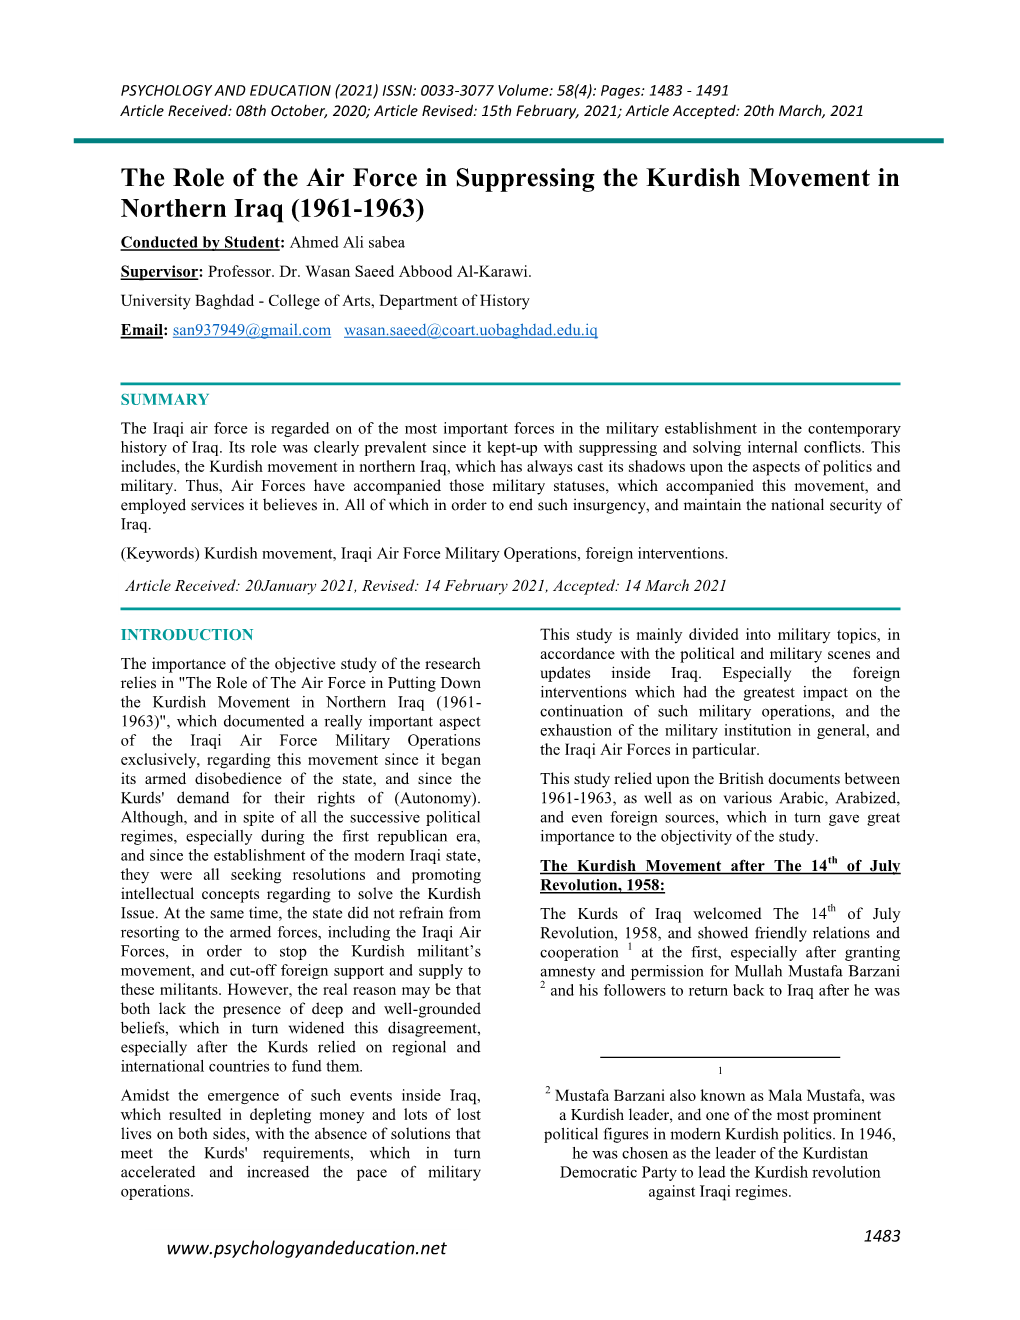 The Role of the Air Force in Suppressing the Kurdish Movement in Northern Iraq (1961-1963) Conducted by Student: Ahmed Ali Sabea Supervisor: Professor